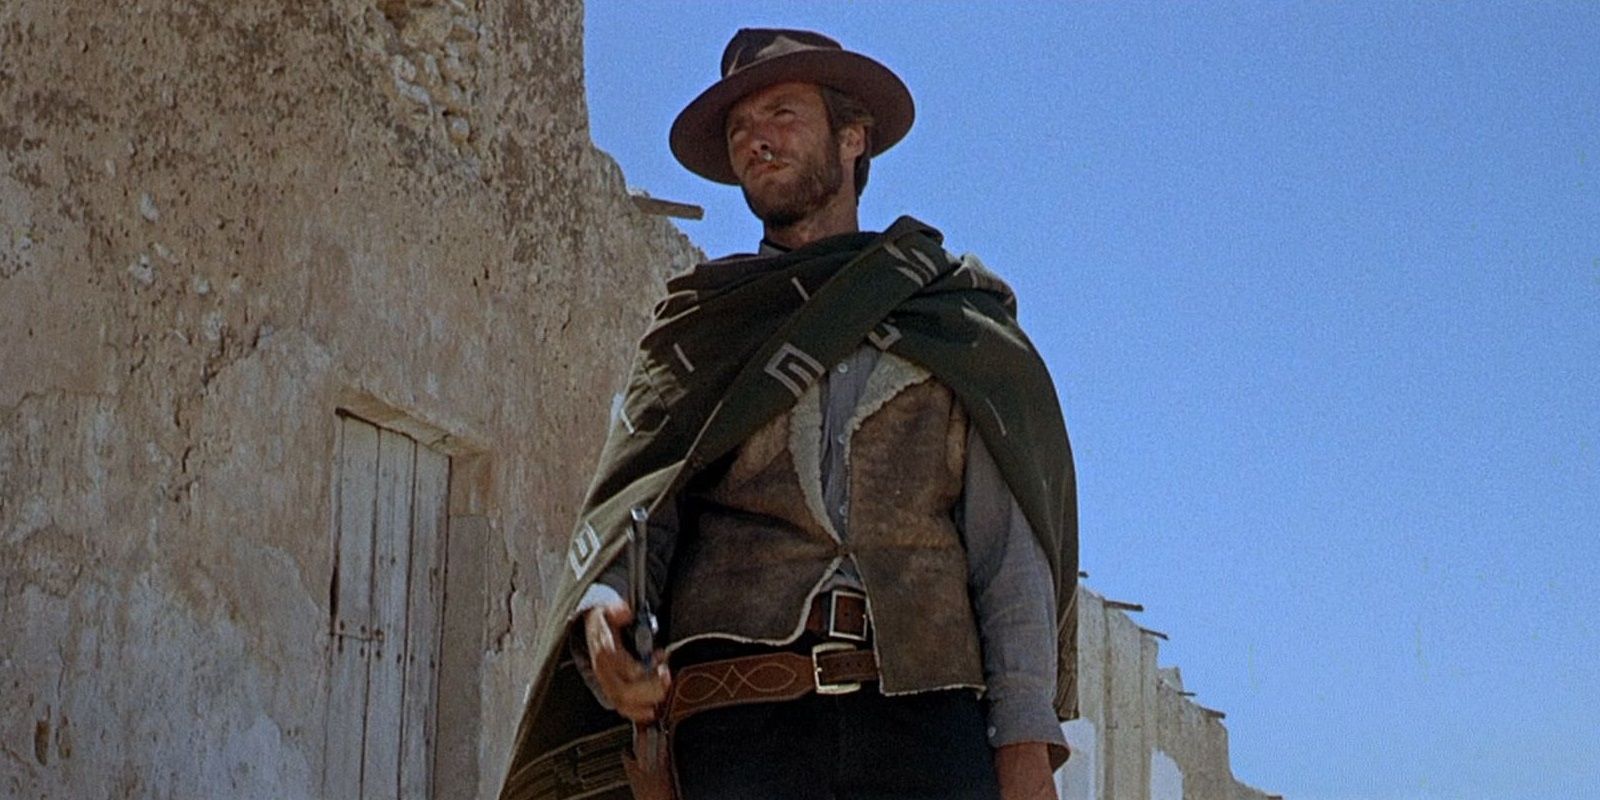 Clint Eastwood holding a gun in A Fistful of Dollars